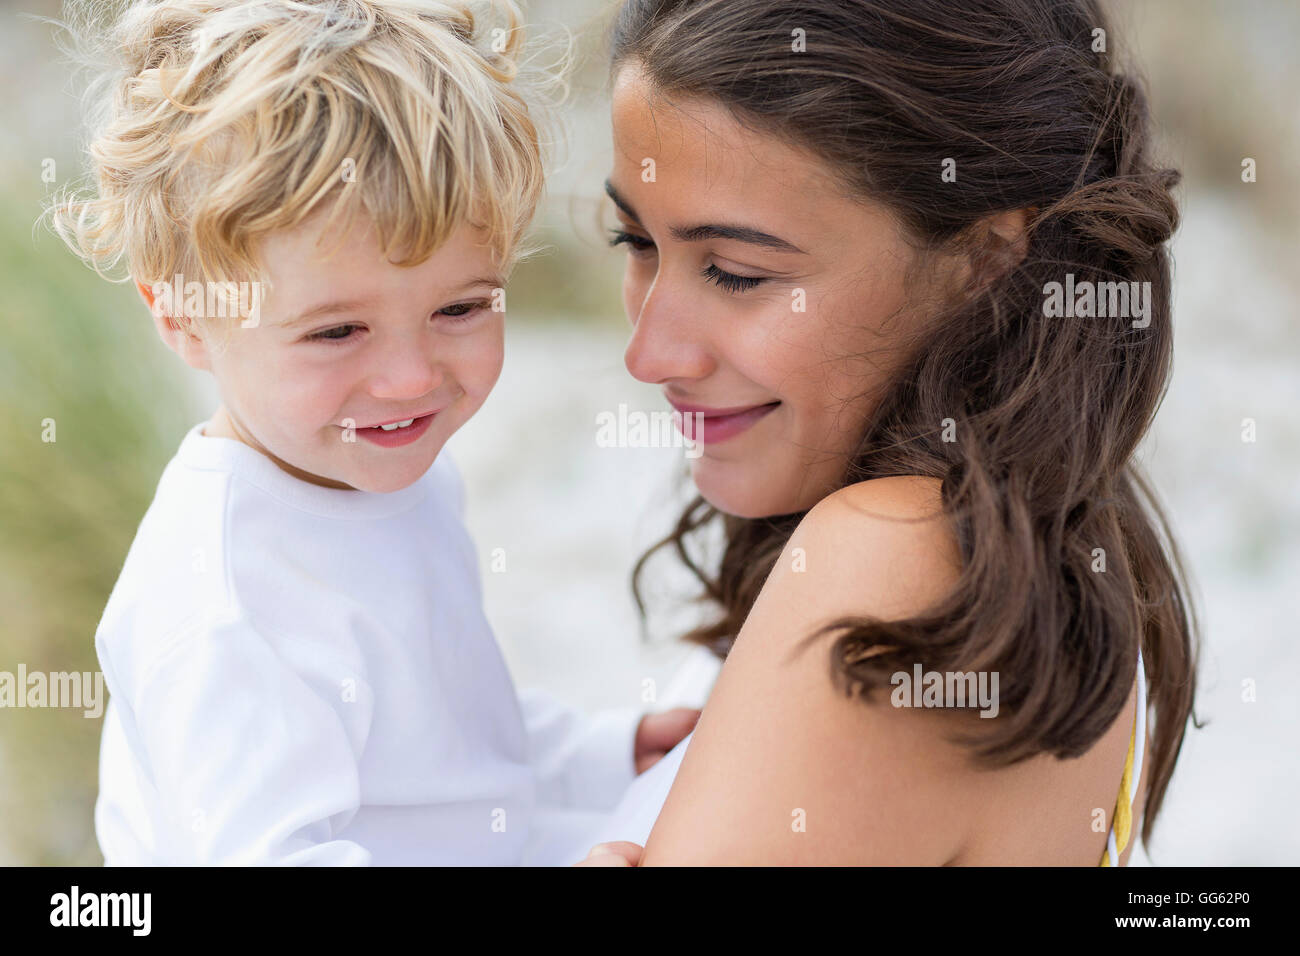 Close-up of a woman loving with her son Stock Photo